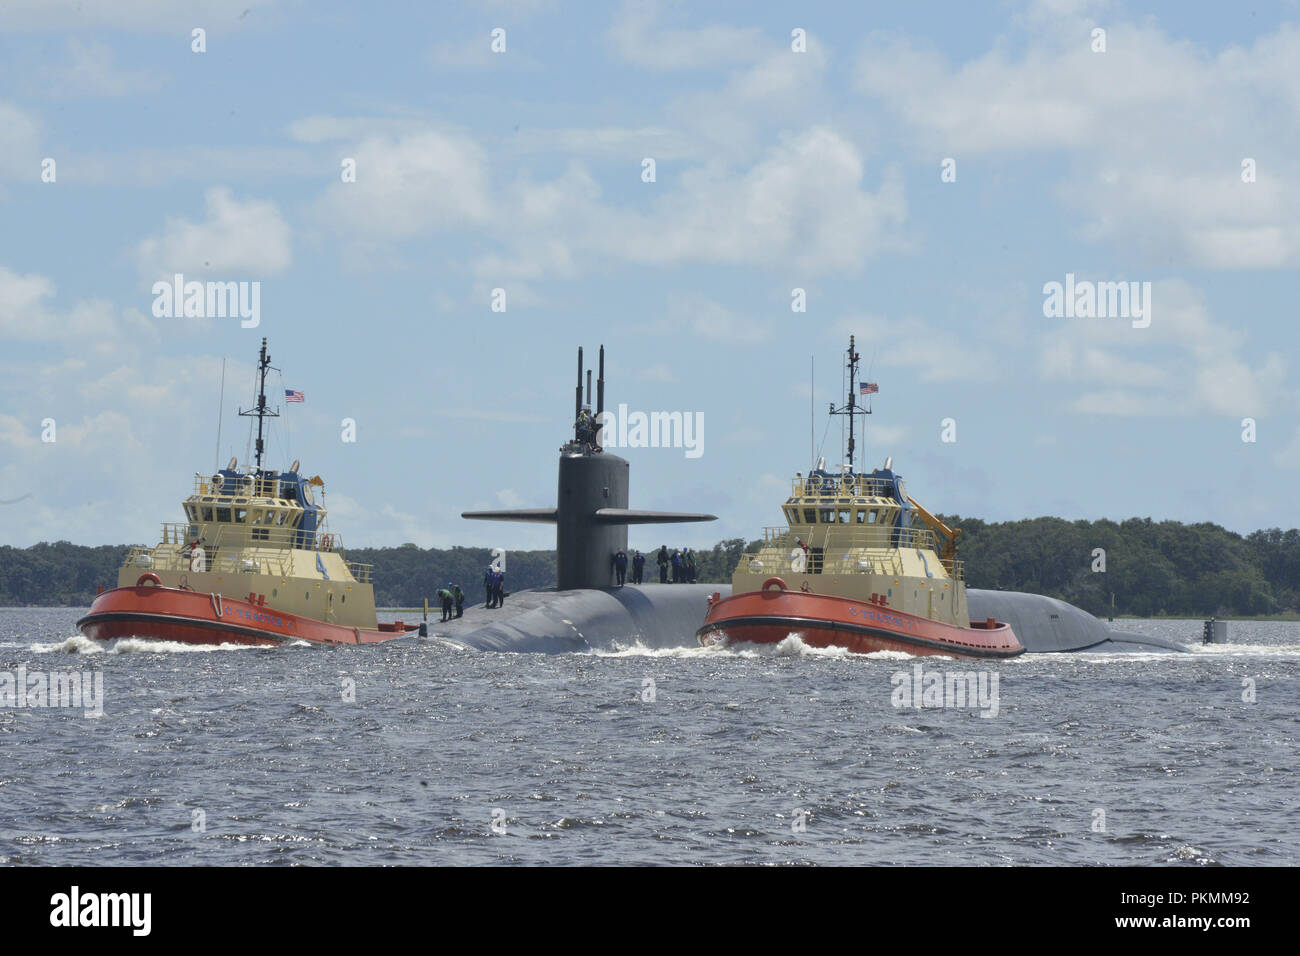 Kings Bay, Georgia, USA. 13th Sep, 2018. KINGS BAY, GA. (Sept. 12, 2018) The Ohio-class ballistic-missile submarine USS Rhode Island (SSBN 740) returns to its homeport at Naval Submarine Base Kings Bay, Ga., following the completion of sea trails. Rhode Island recently completed a 33-month engineered refueling overhaul, which will extend the life of the submarine for another 20 years. The boat is one of five ballistic-missile submarines stationed at the base and is capable of carrying up to 20 submarine-launched ballistic missiles with multiple warheads. (U.S. Navy photo by Lt. Stock Photo